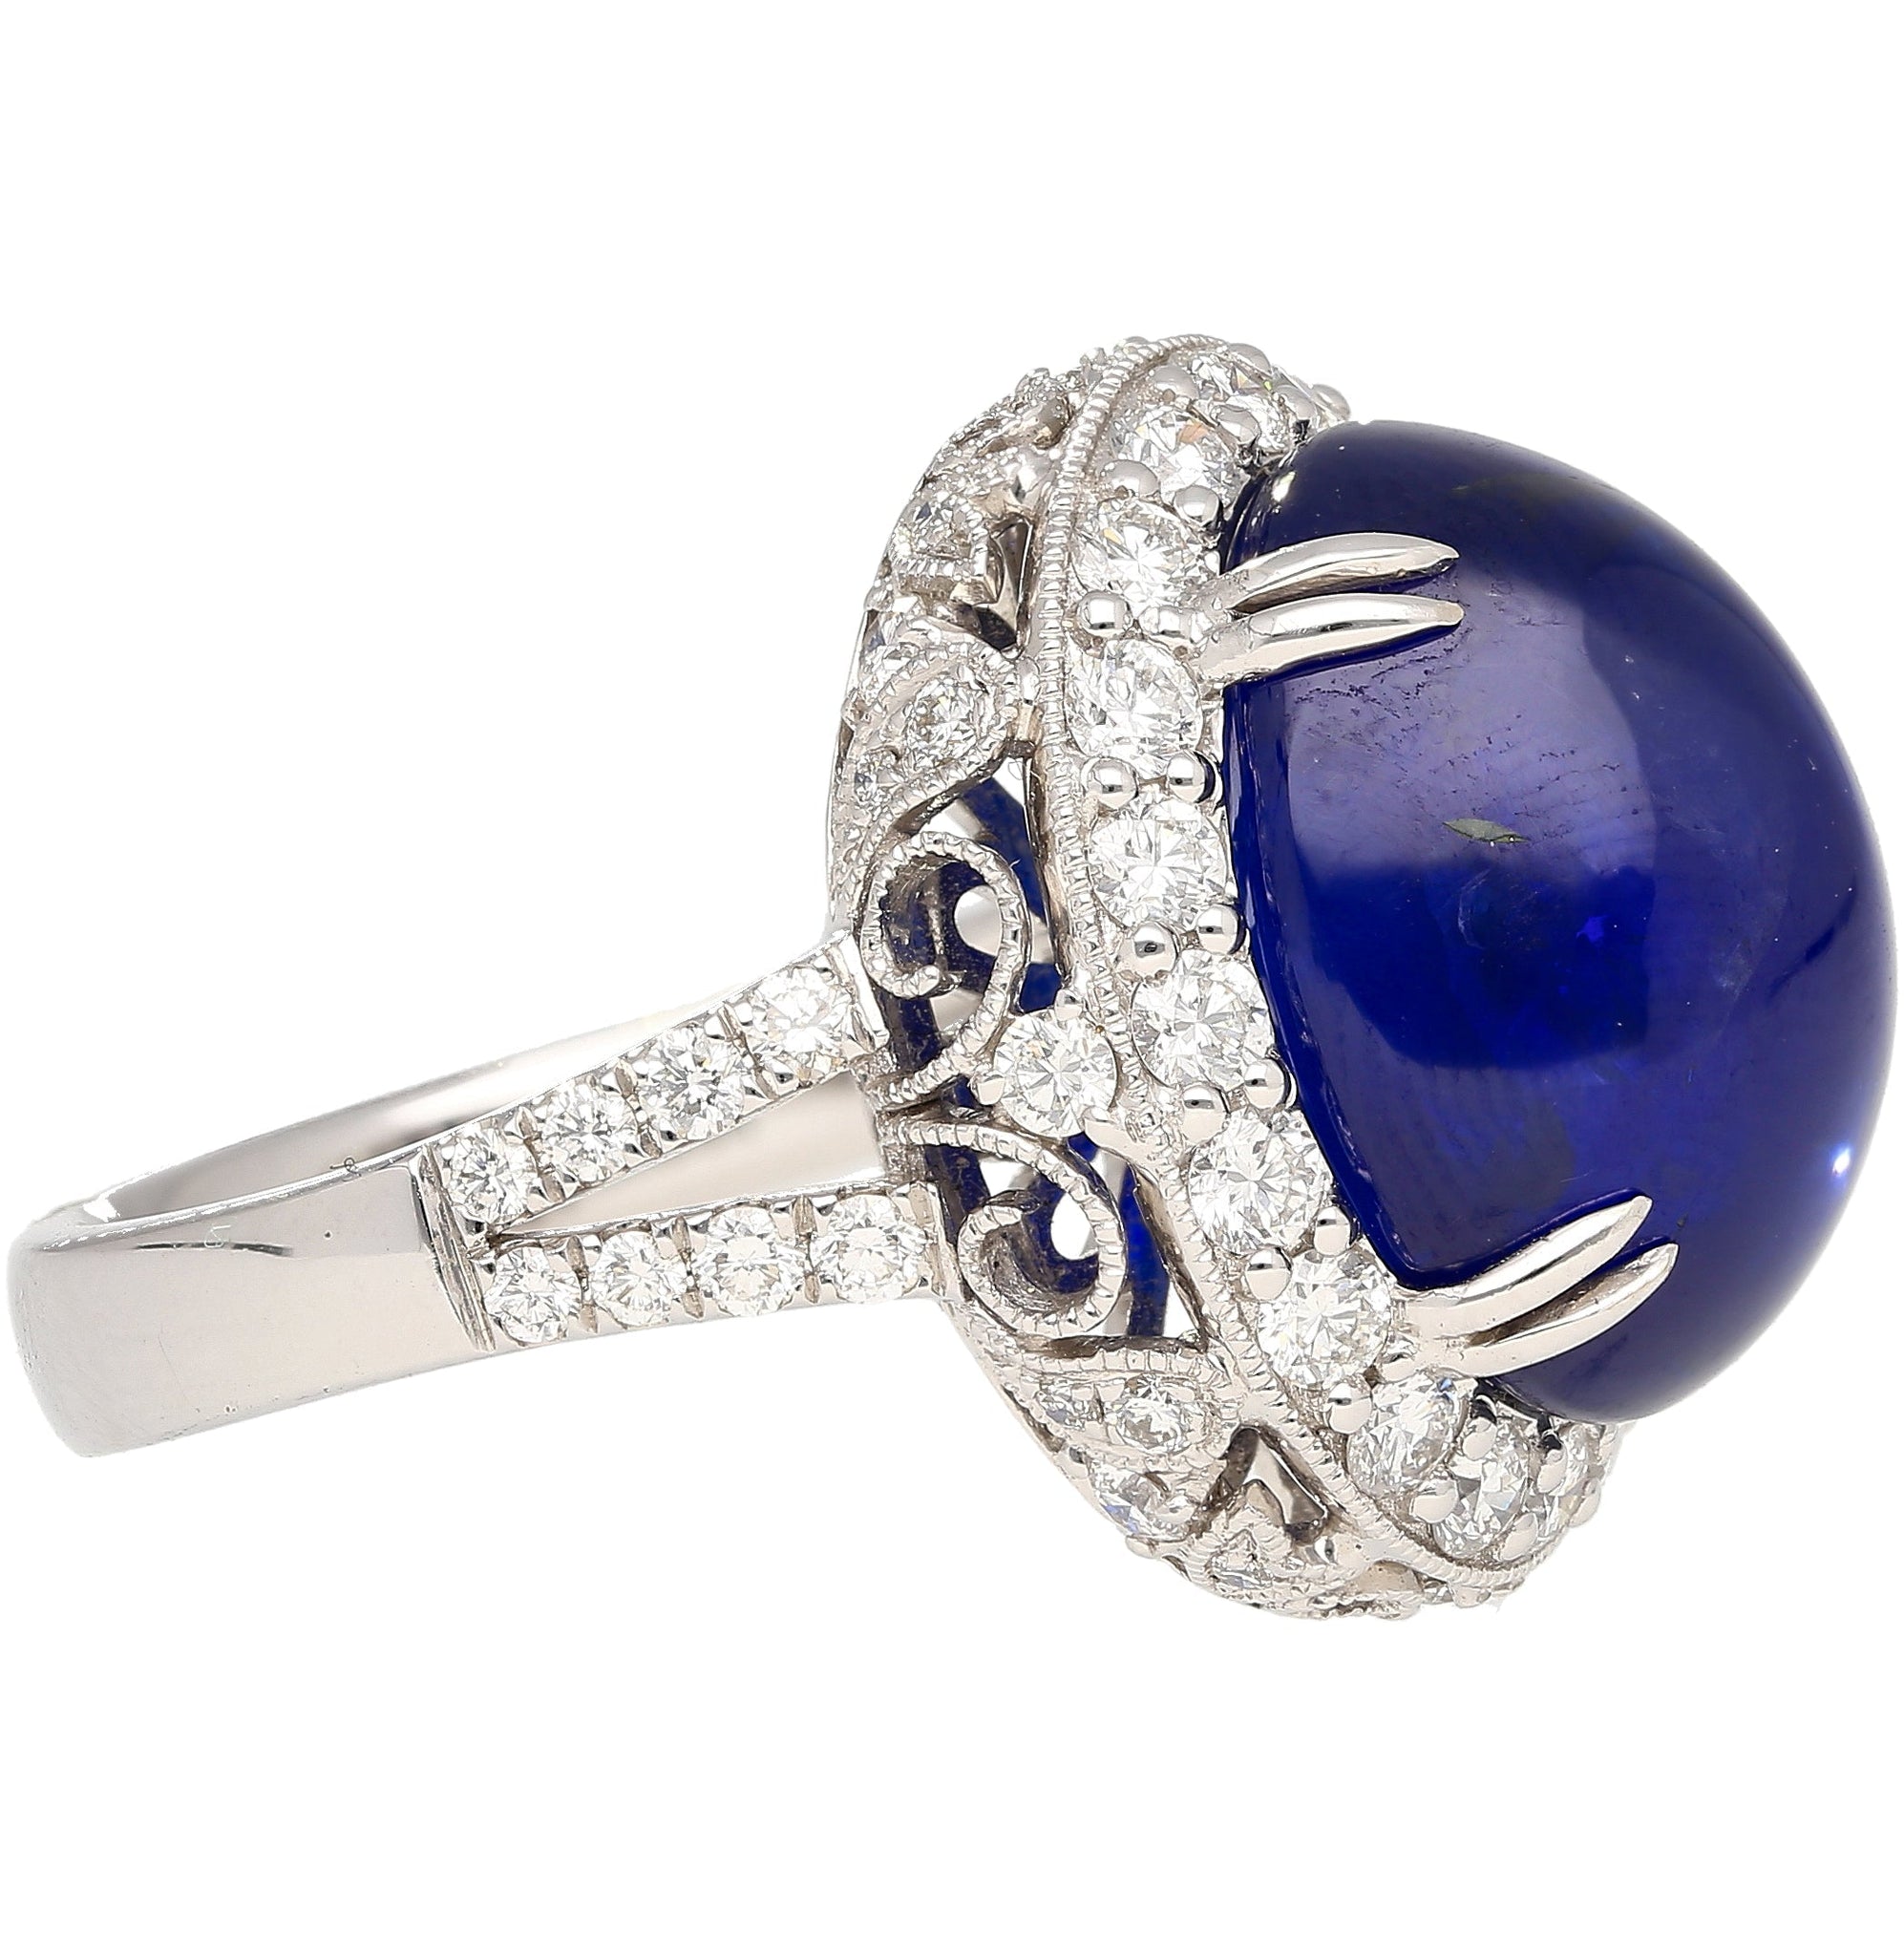 AGL Certified 16.68 Carat Cabochon Cut Ceylon Blue Sapphire Ring with Diamond Halo and Filigree Set 18K White Gold-Rings-ASSAY